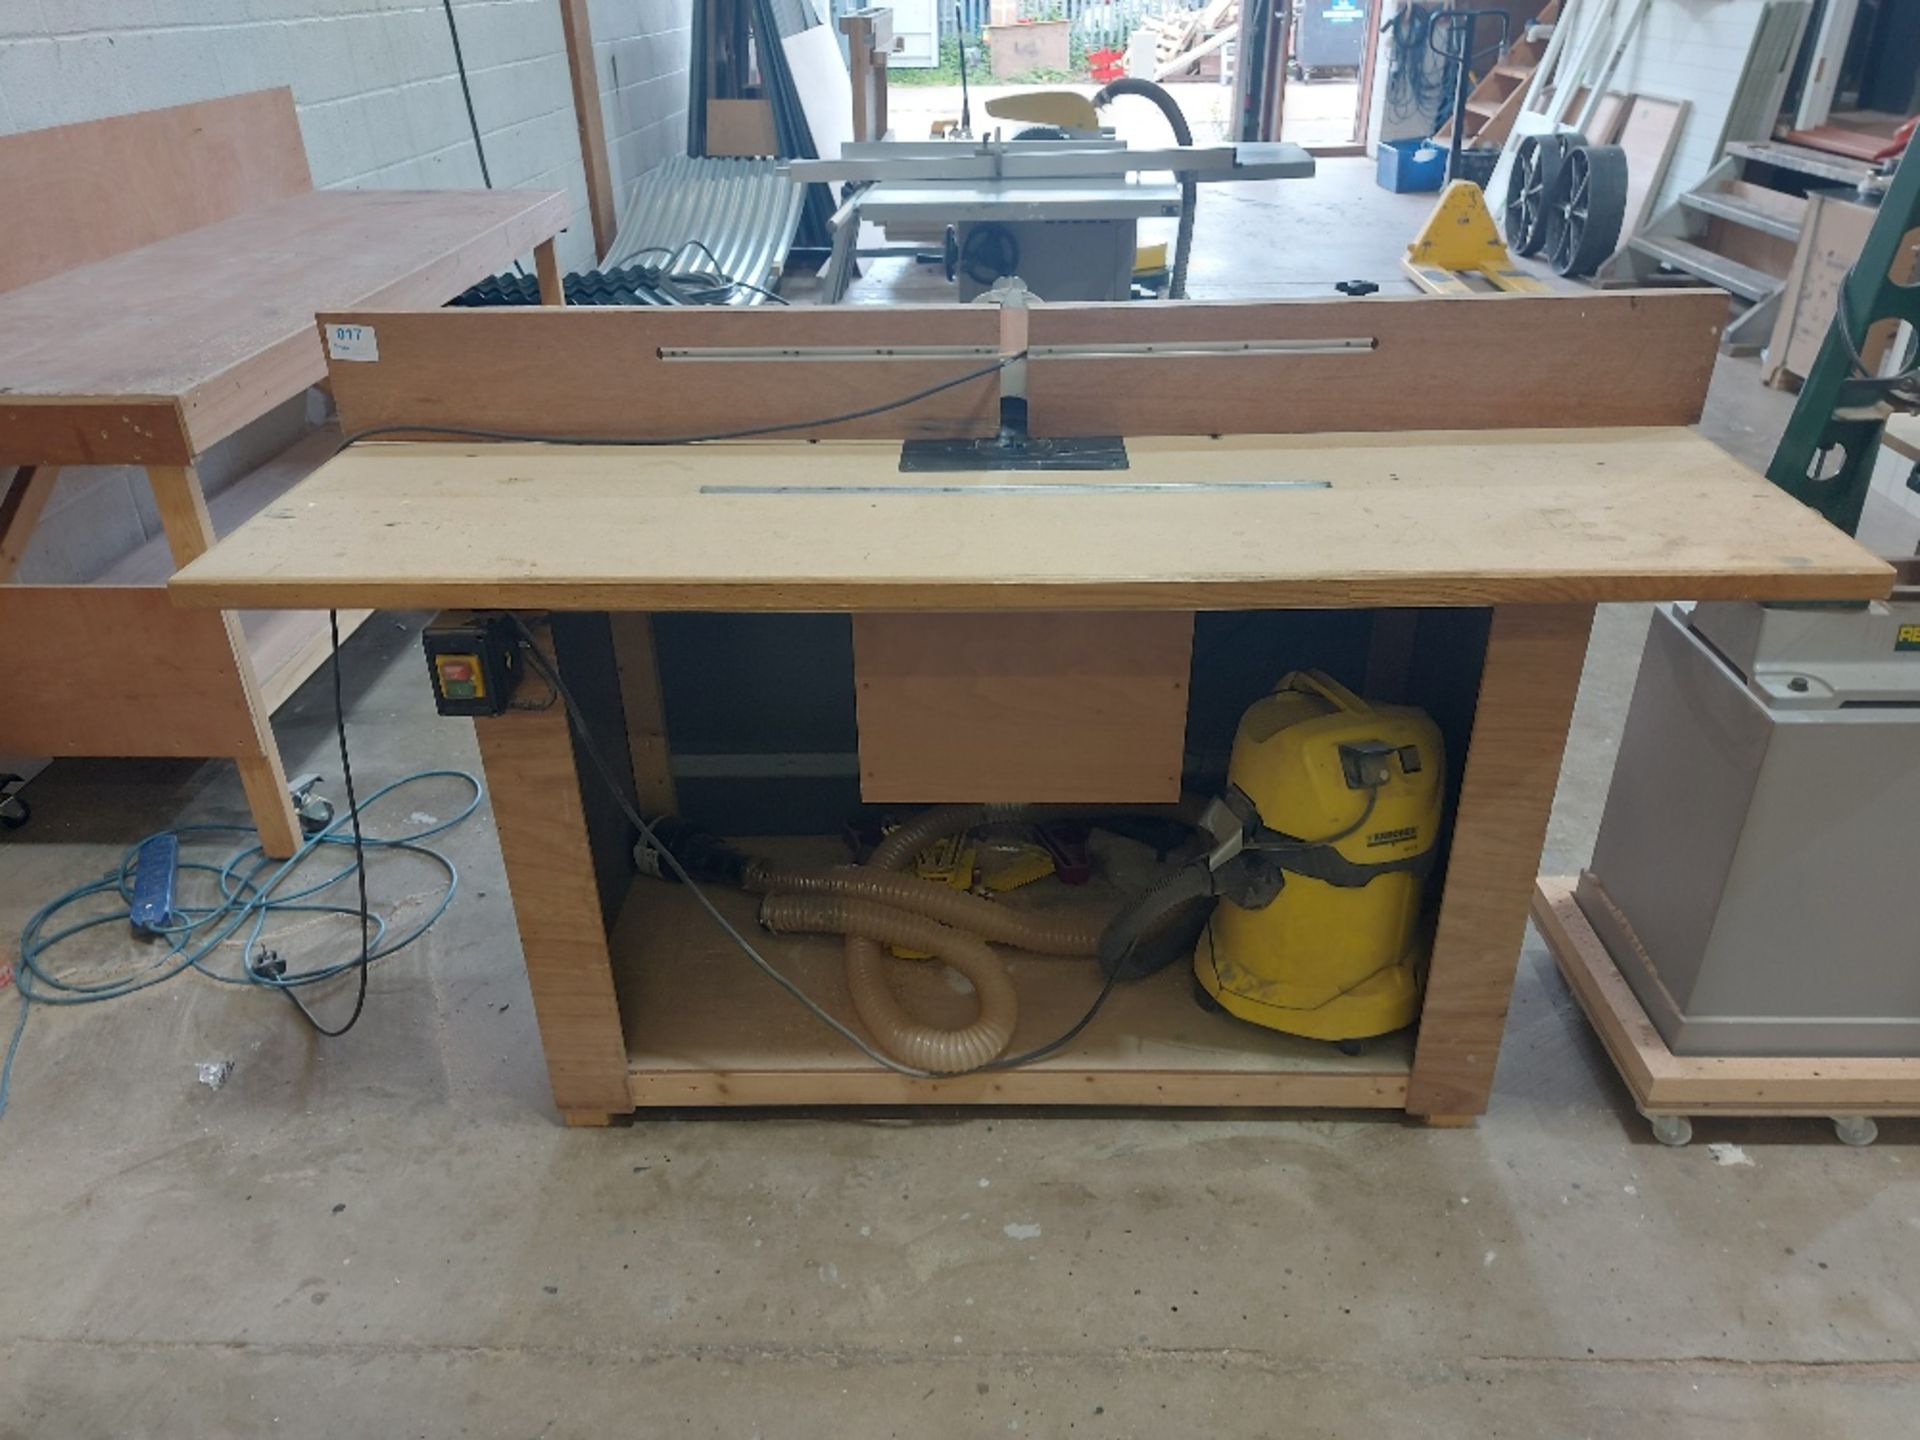 Fabricated Router Workbench With Trend Plunge Router & Karcher MV 3 P Vacuum